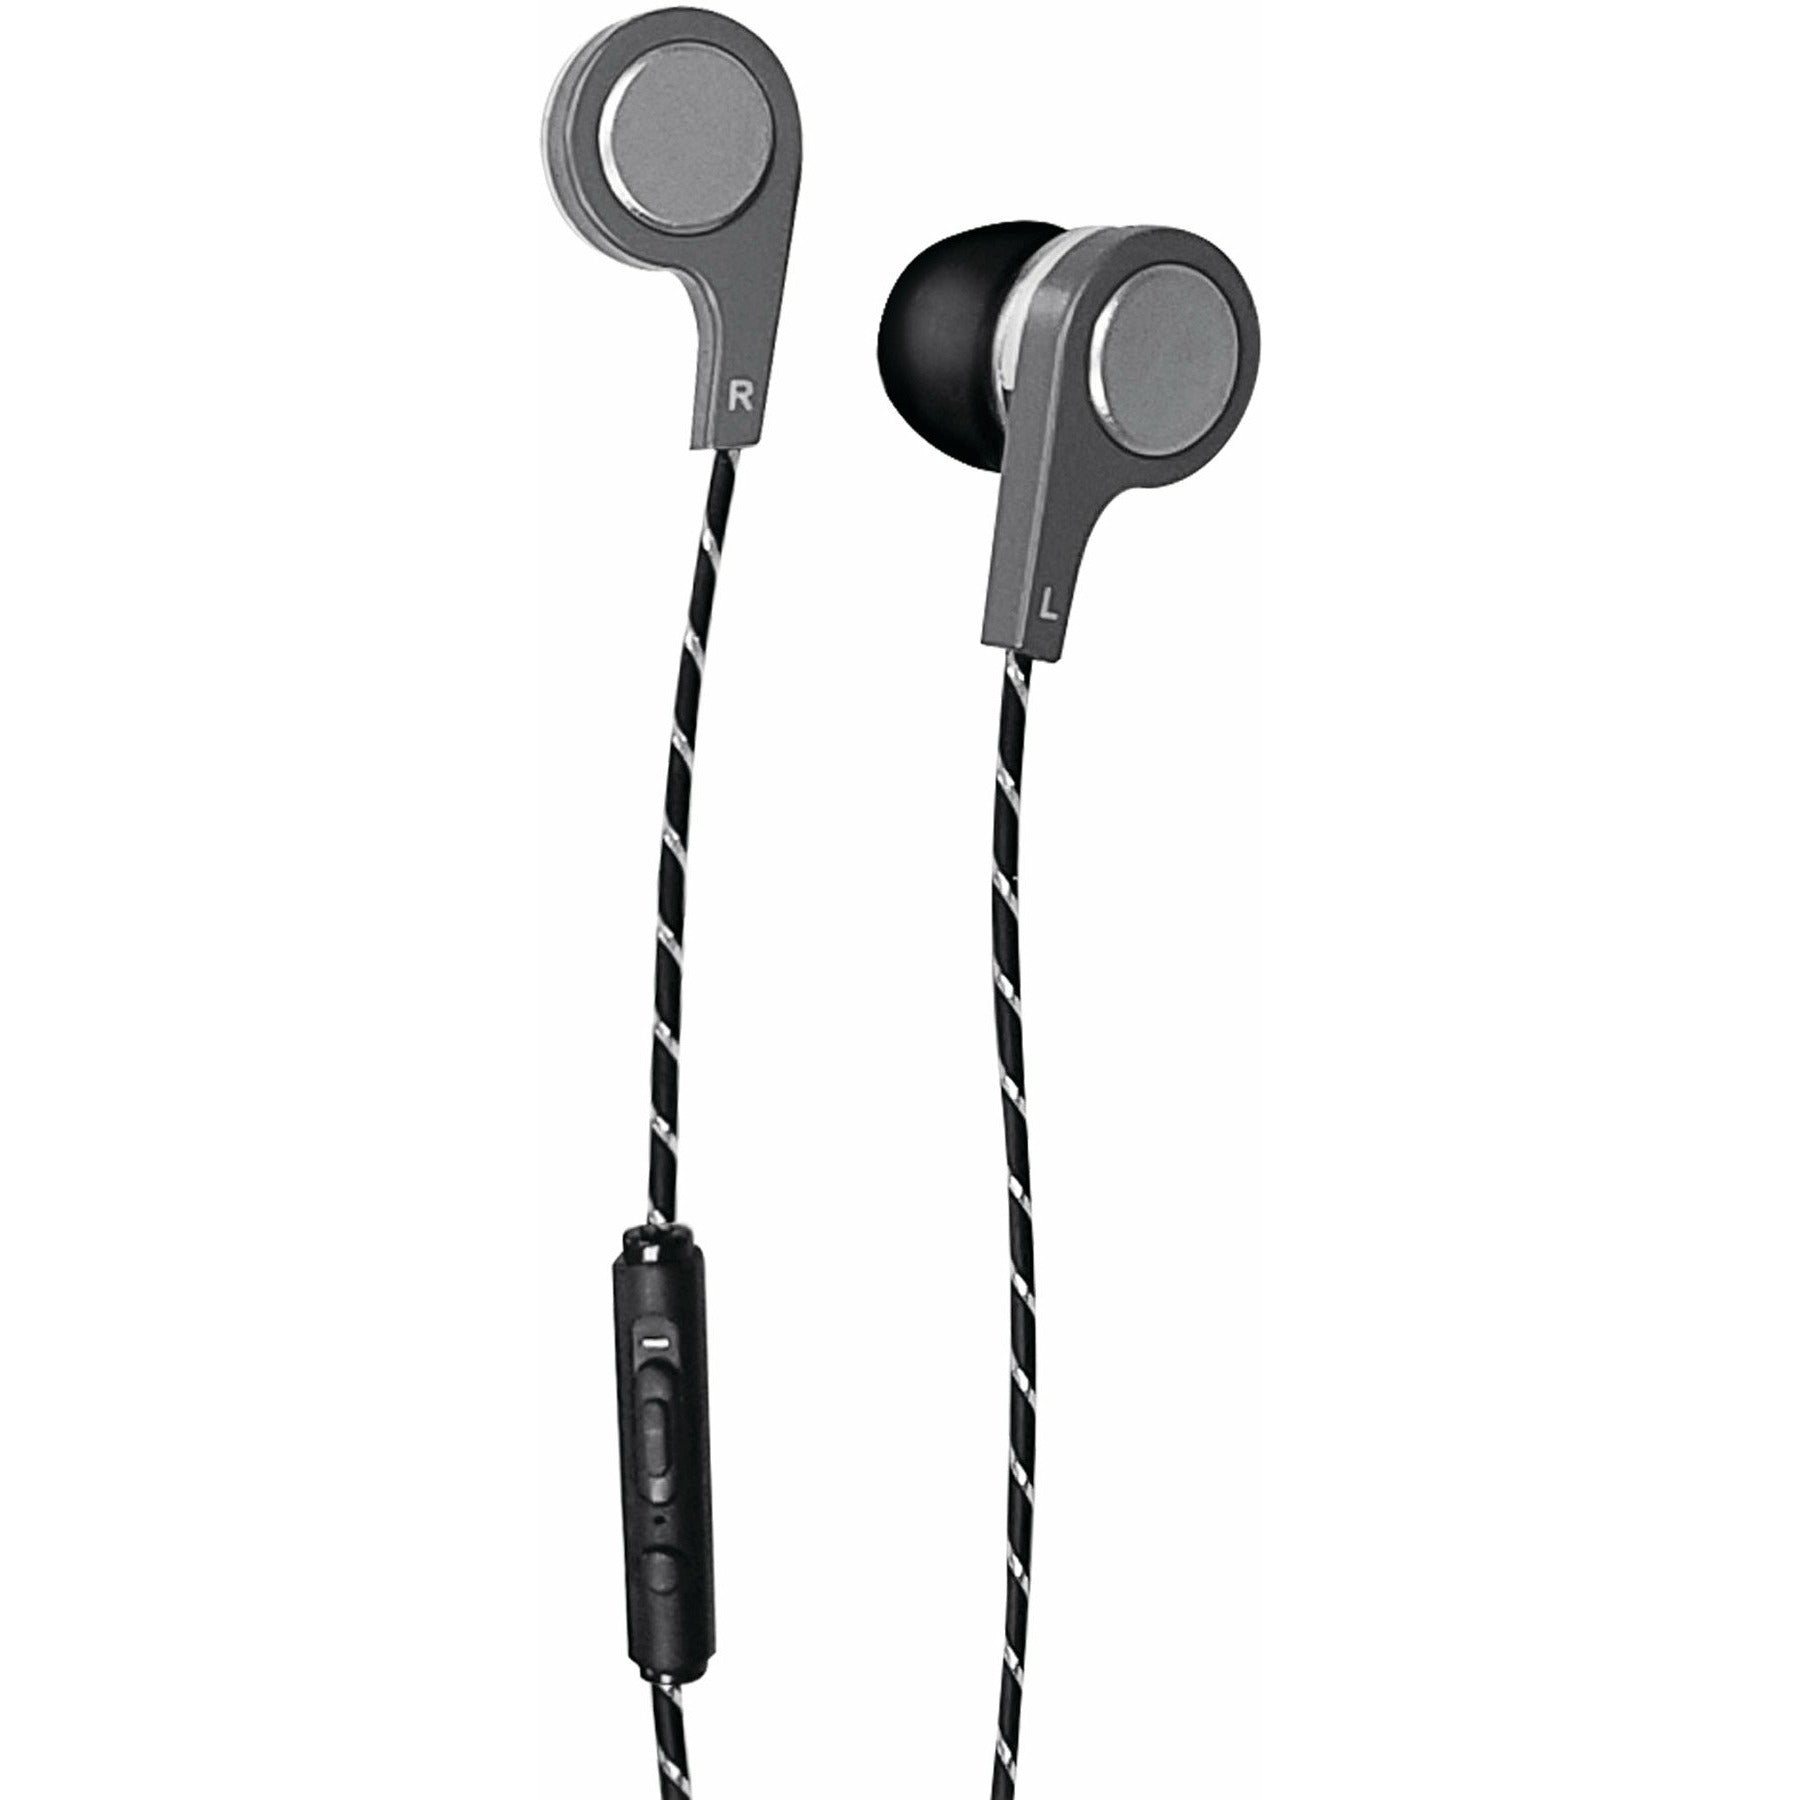 Maxell Bass13™ Metallic Earbuds with Mic & Volume Control